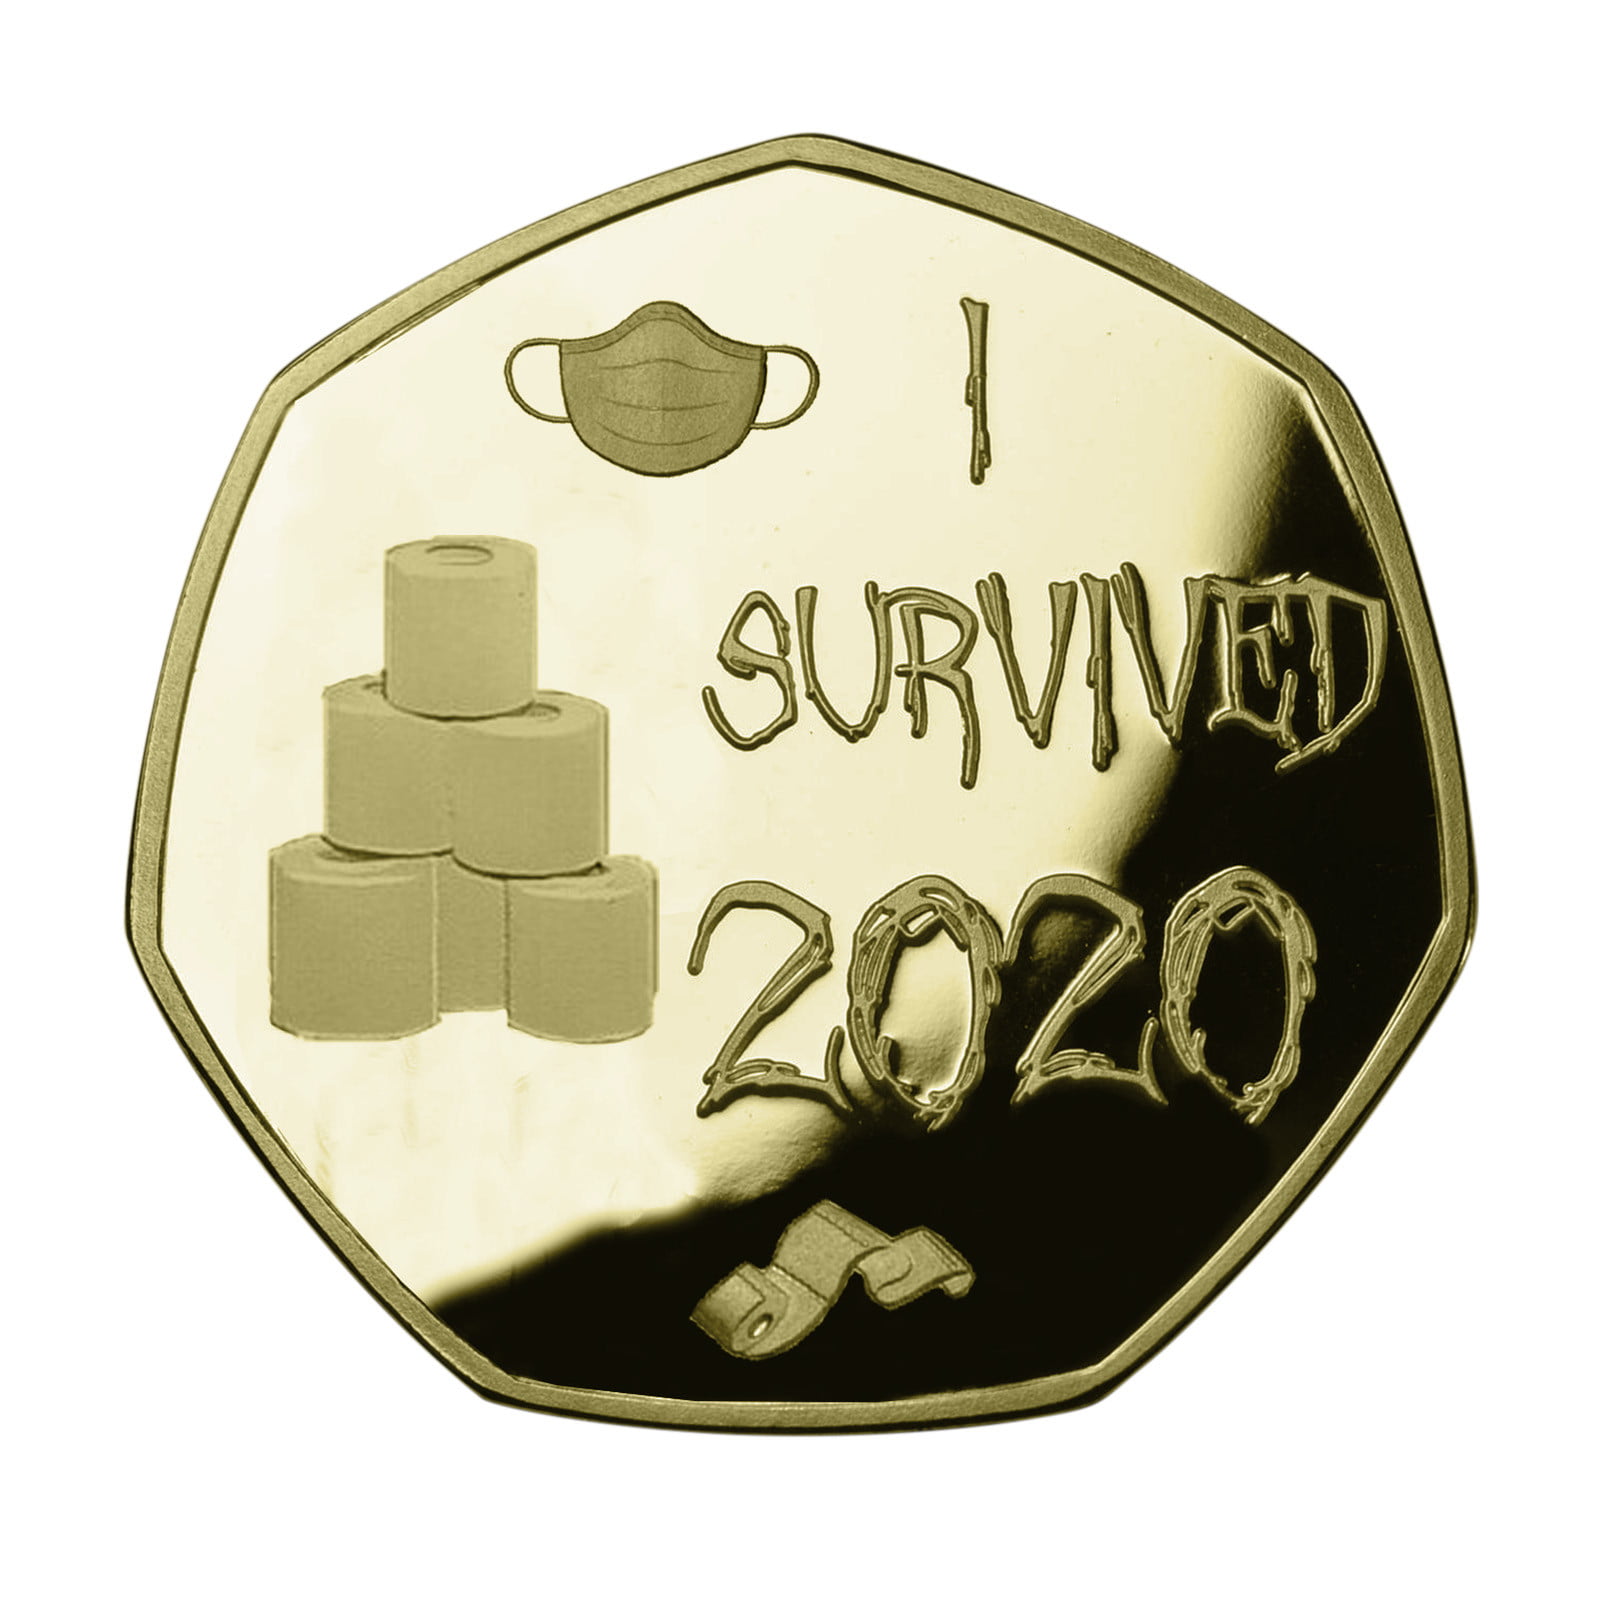 I SURVIVED 2020 MEDAL AND COMMEMORATIVE SET 50P COIN COLLECTORS MEMENTO GIFT 